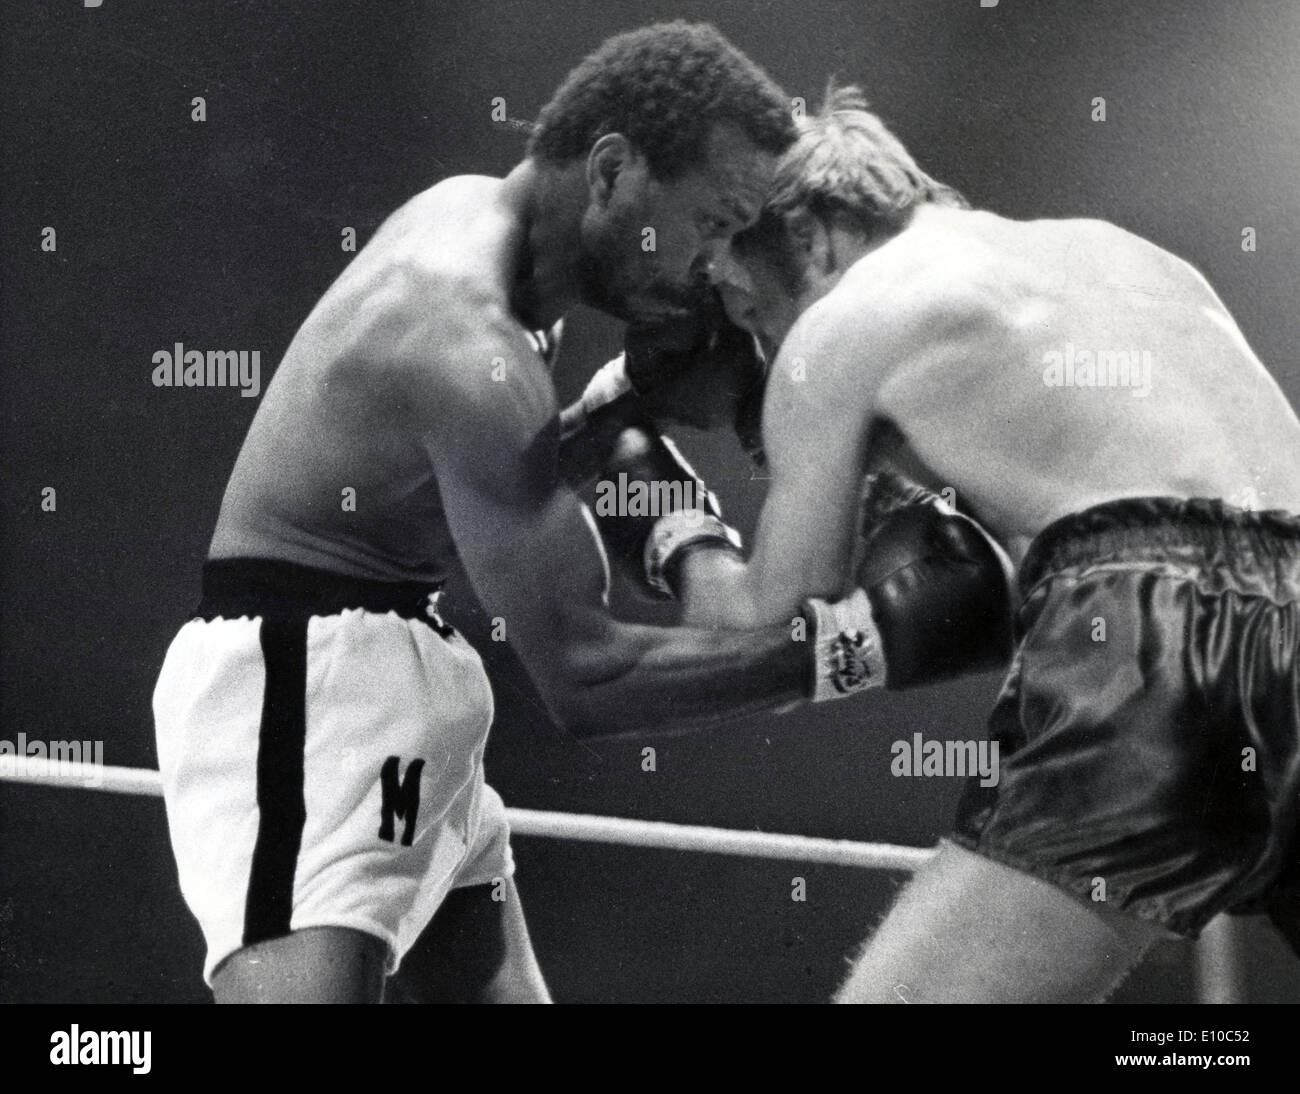 Welterweight boxing champion JOSE NAPOLES fighting against British contender RALPH CHARLES during their title fight Empire Pool. Stock Photo